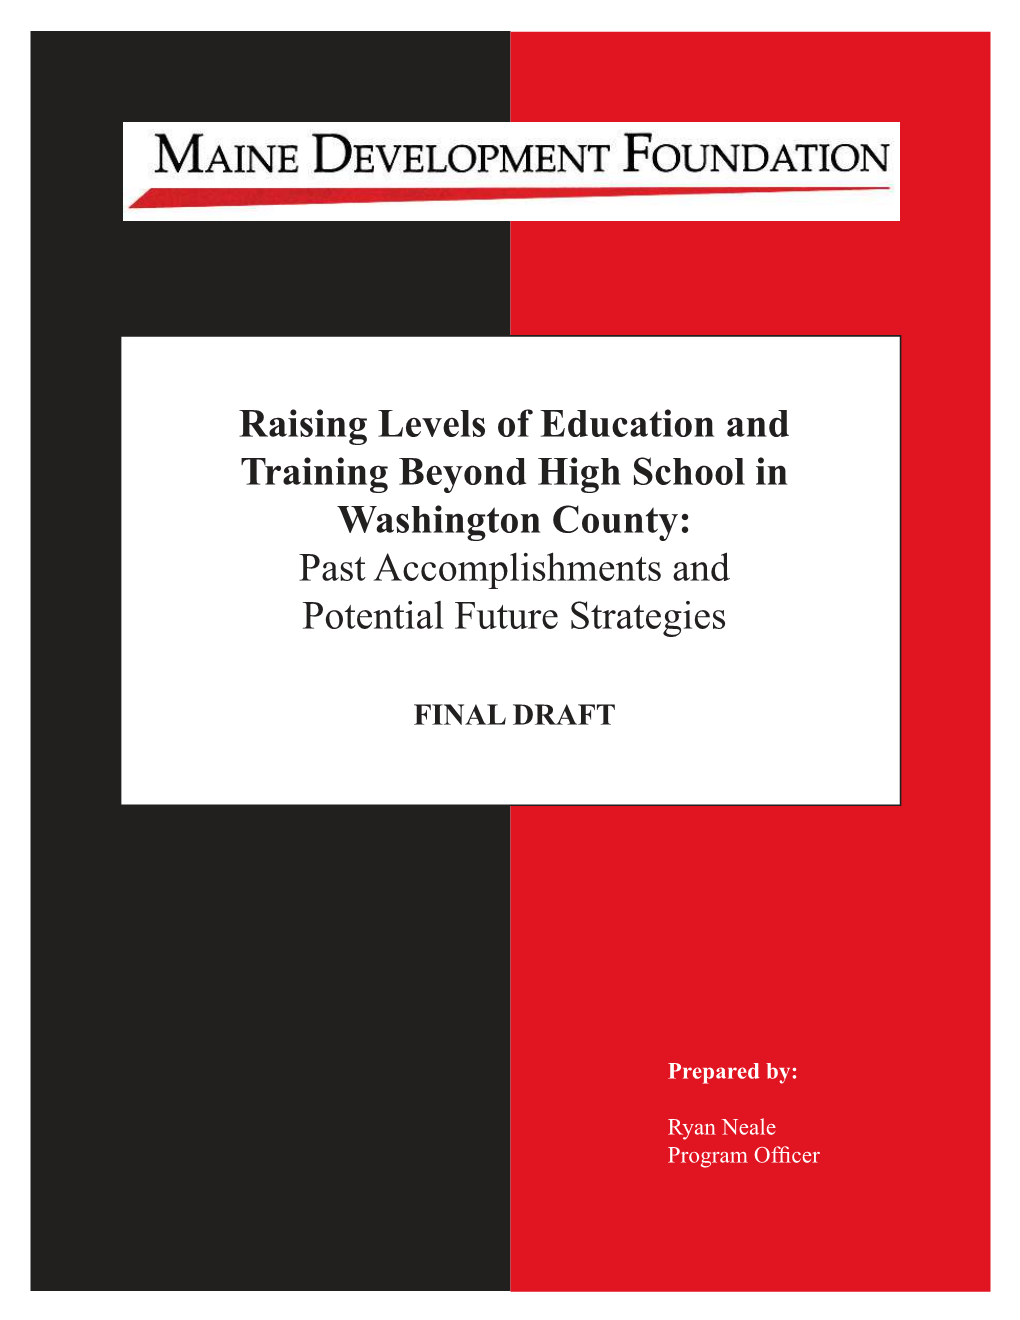 Raising Levels of Education and Training Beyond High School in Washington County: Past Accomplishments and Potential Future Strategies